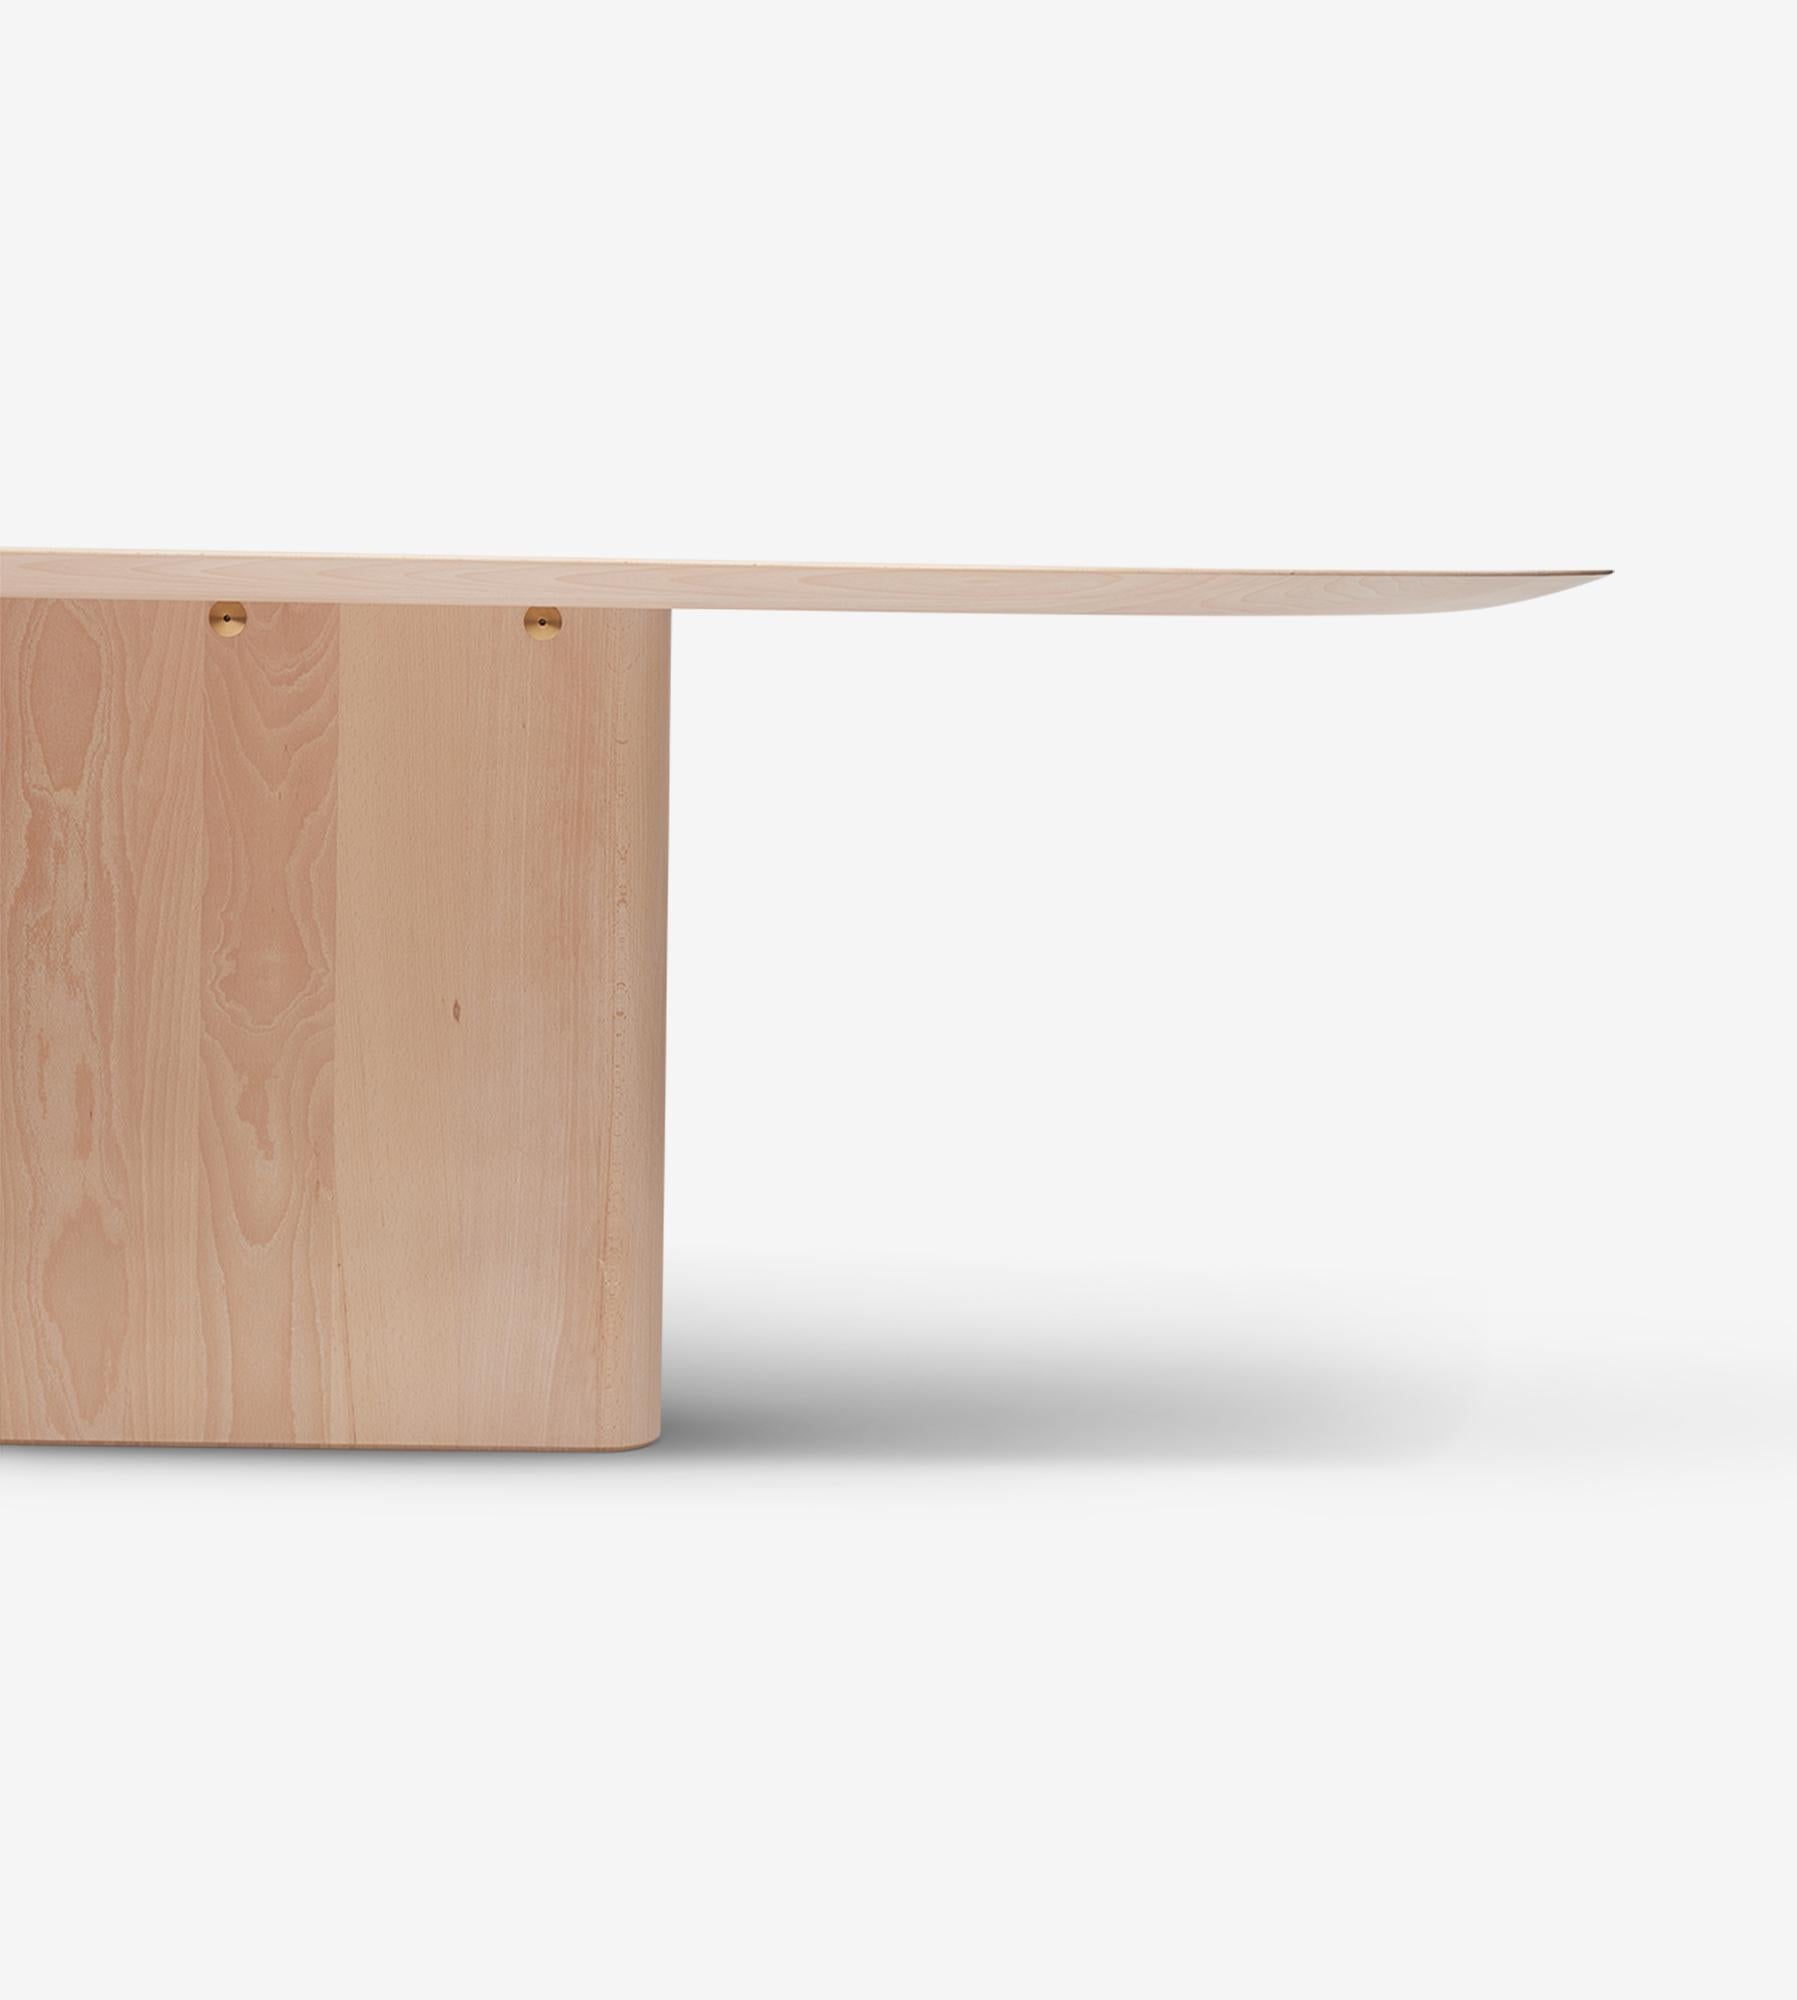 MG210 Sculptural dining table.  Malte Gormsen Kollektion and can be made to order in both
oak and beech.

Surface treatment: Light Beech

Wood is a unique material, and its appearance can be influenced by various factors. To us, surface treatment